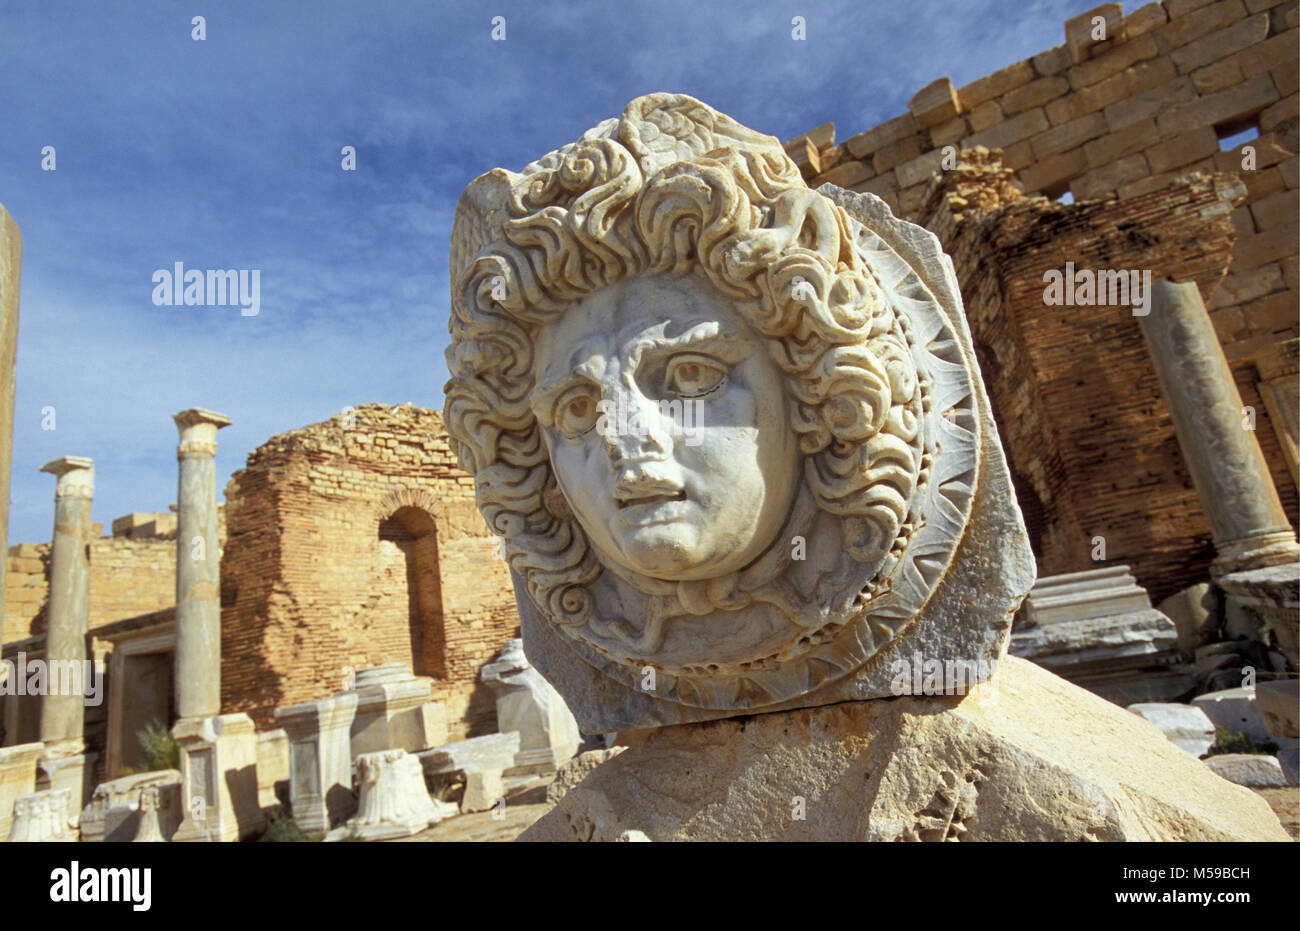 Libya. Tripoli. Leptis Magna. Roman ruins. Statue at Leptis Magna Ruins. Unesco, World Heritage Site. Archaeological Site of Leptis Magna. Stock Photo